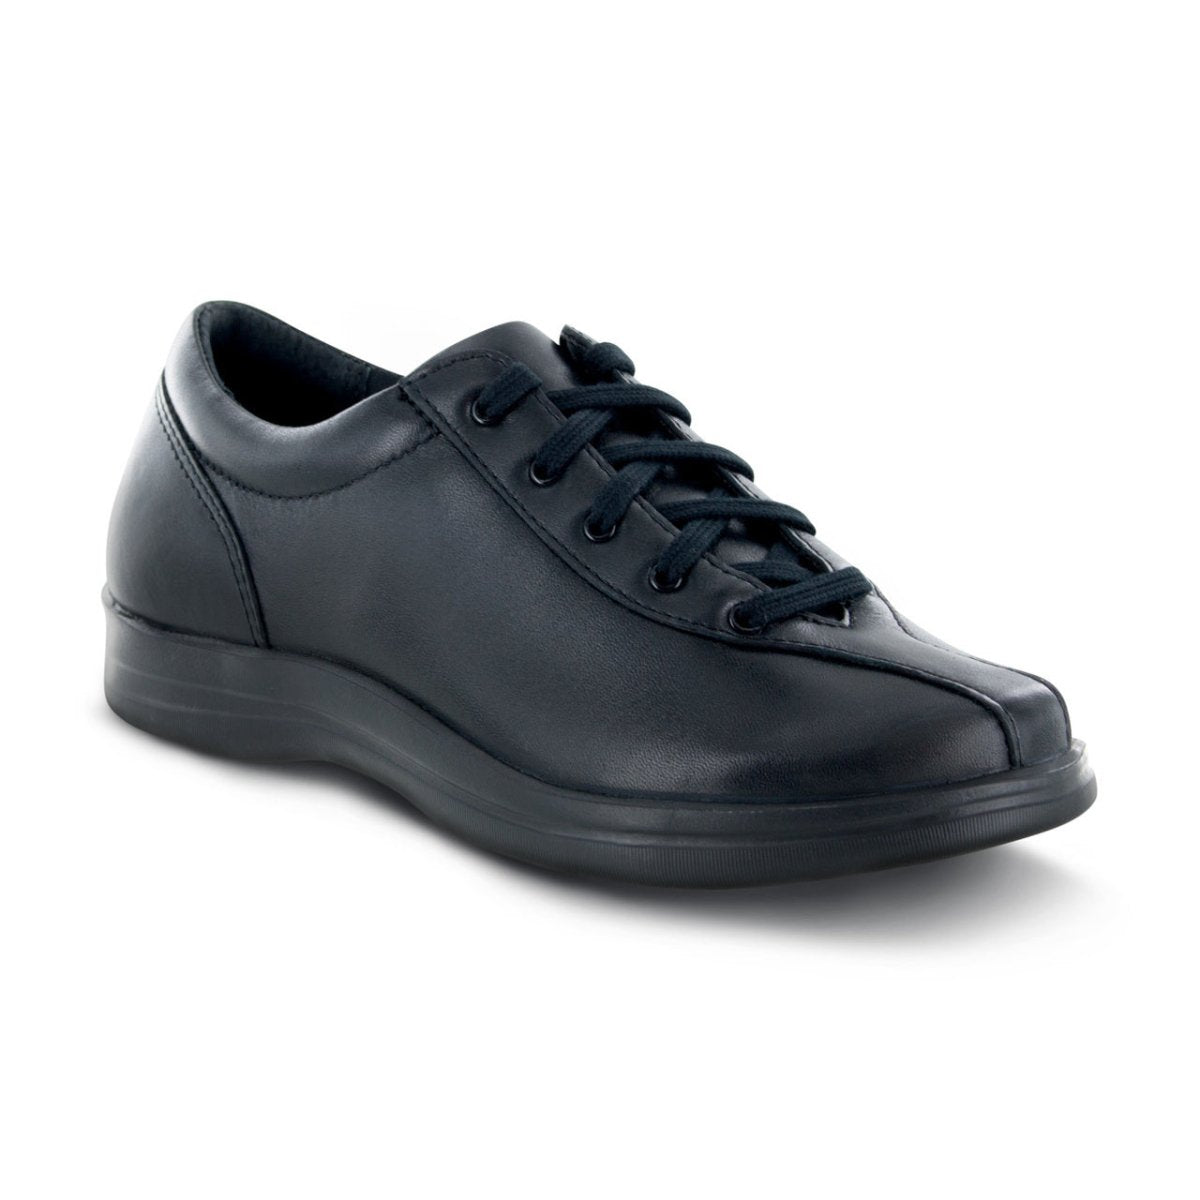 APEX A400W LIV LEATHER LACE-UP WOMEN'S CAUSAL SHOE IN BLACK - TLW Shoes